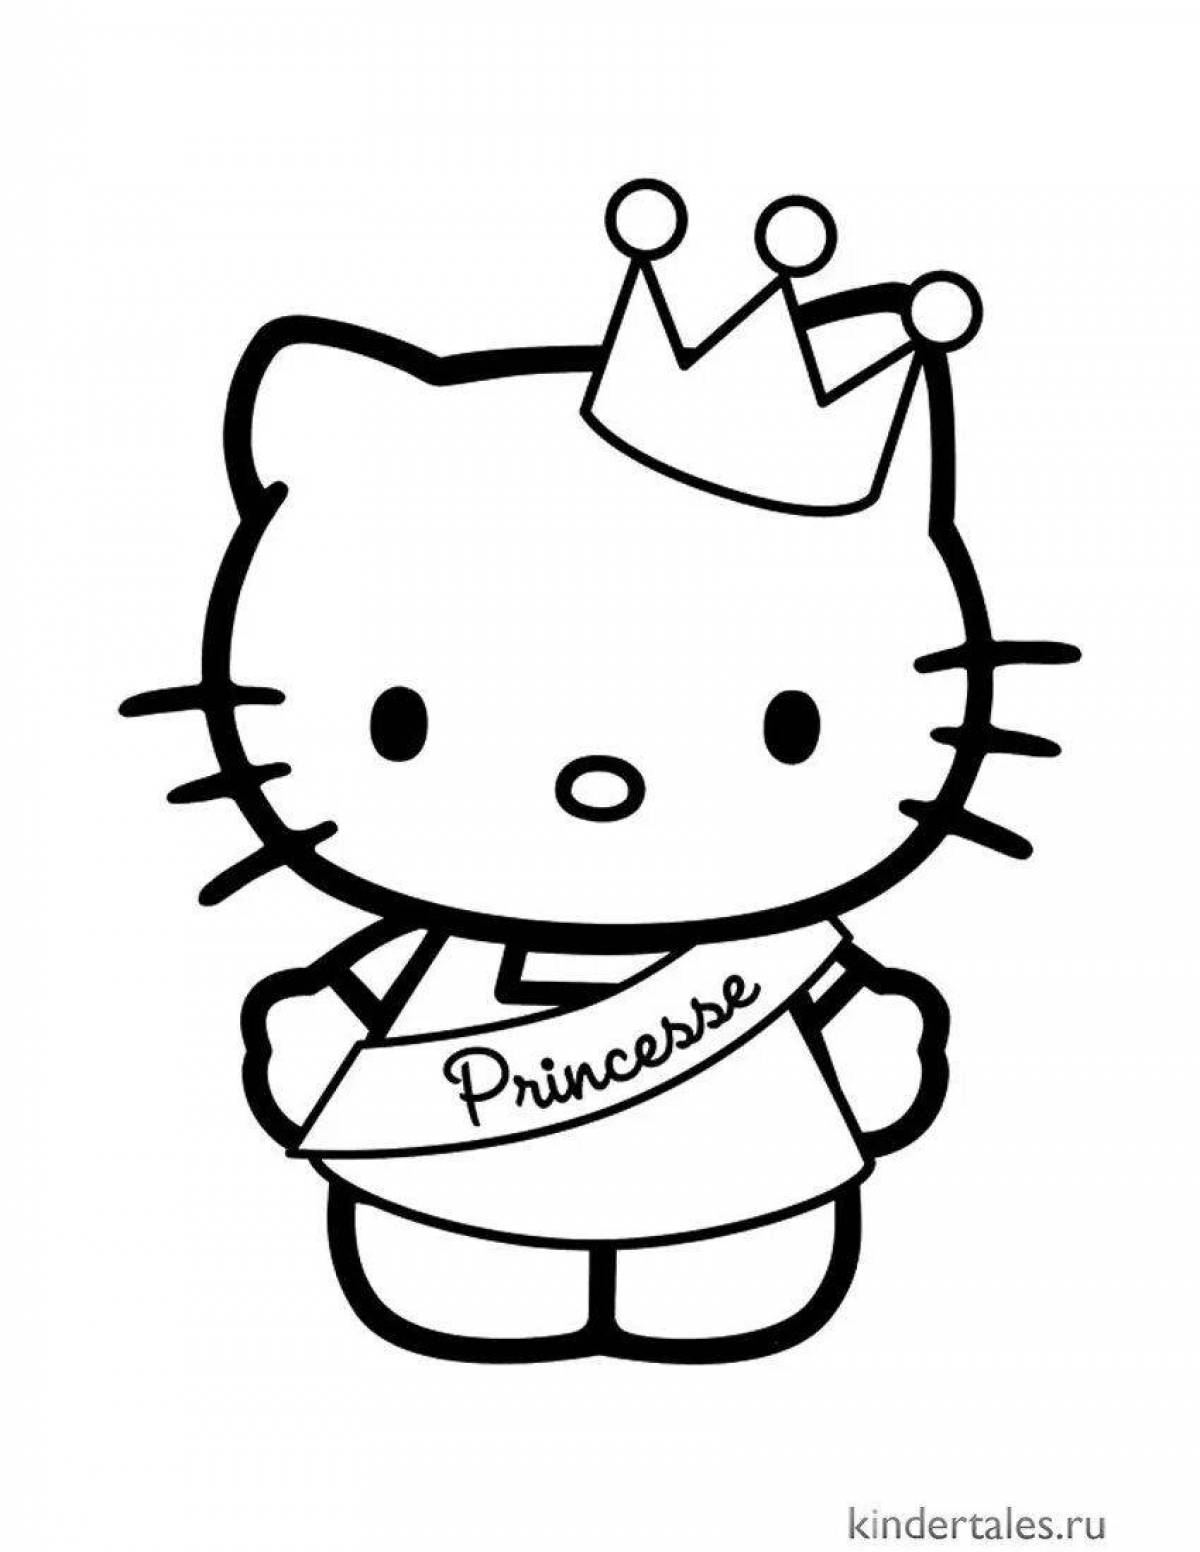 Exquisite hello kitty face coloring page